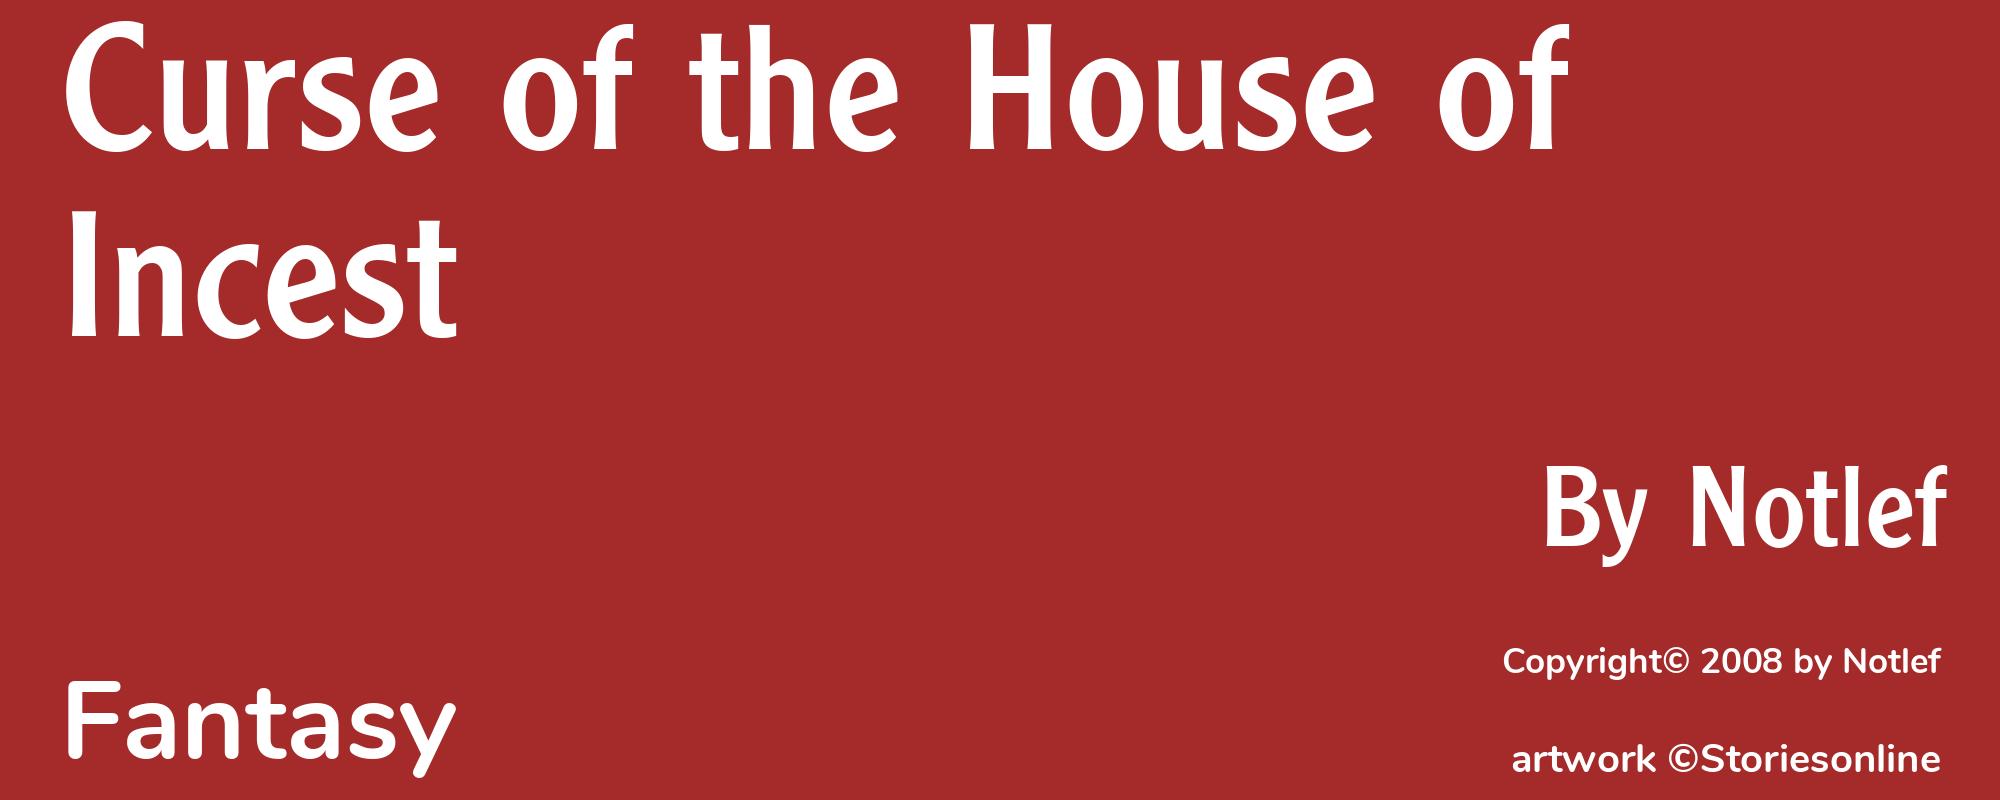 Curse of the House of Incest - Cover